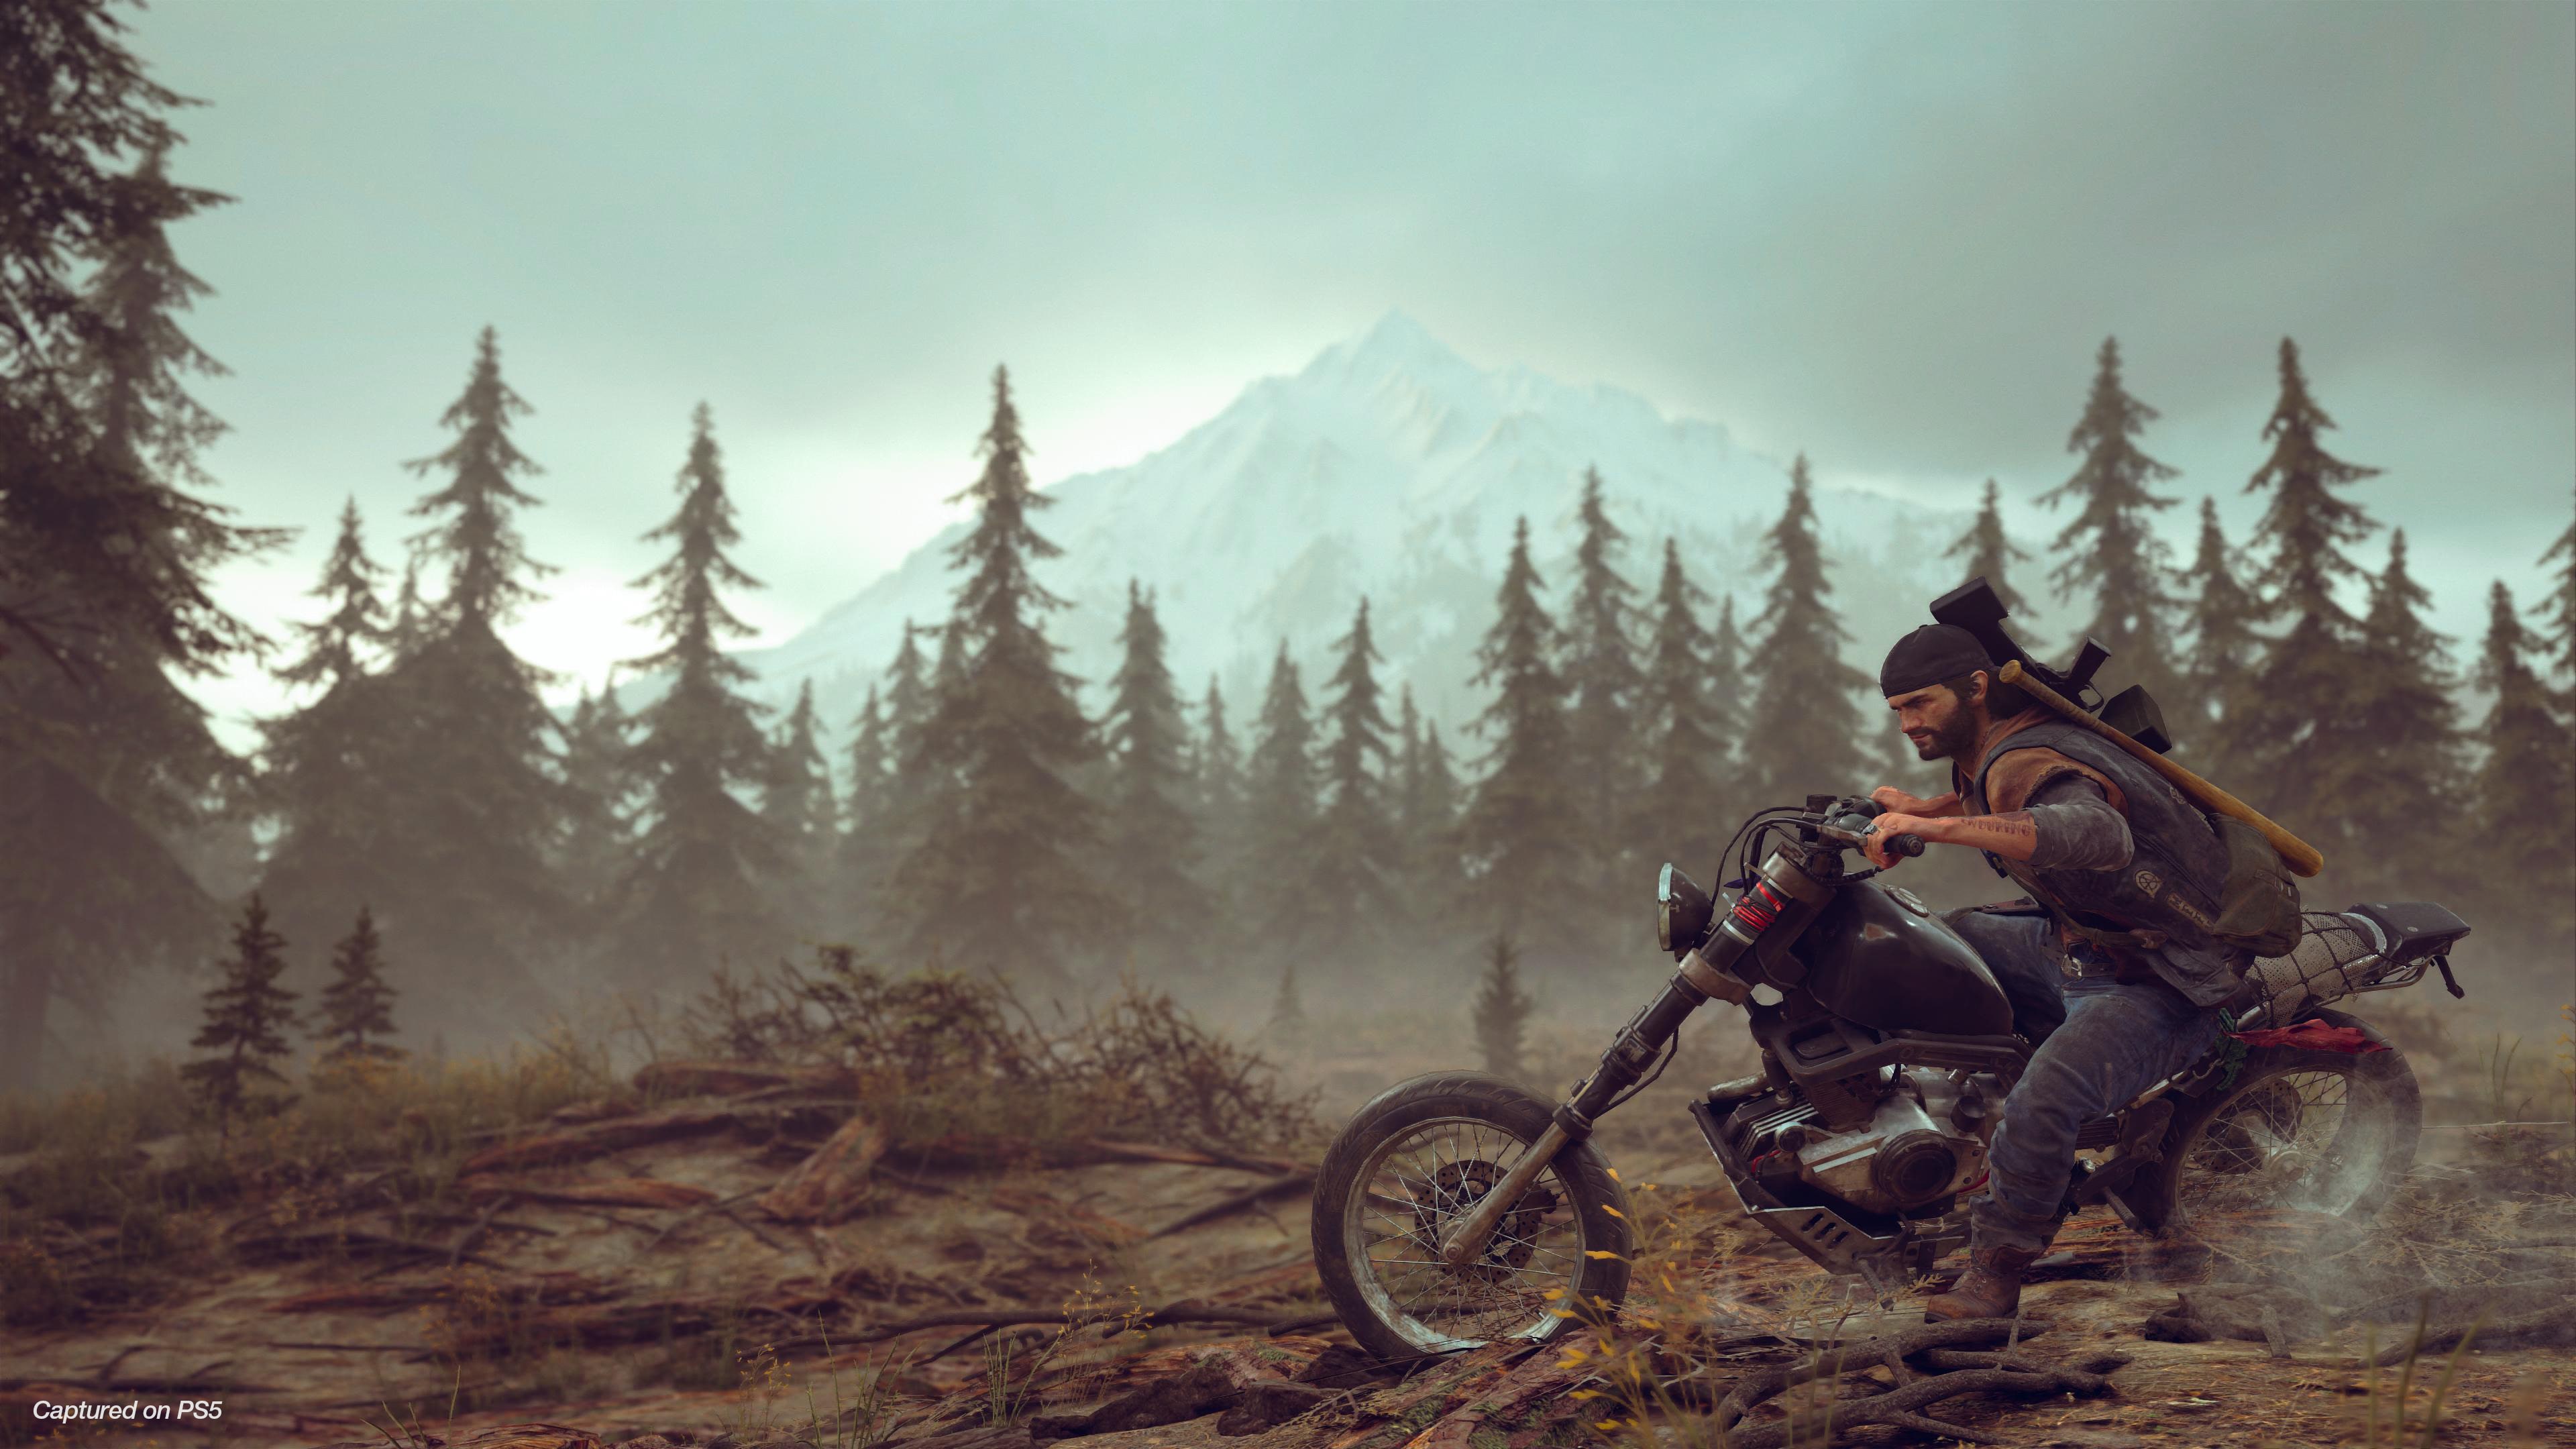 Days Gone - Secundario PS4 + PS5 - Pampa Games